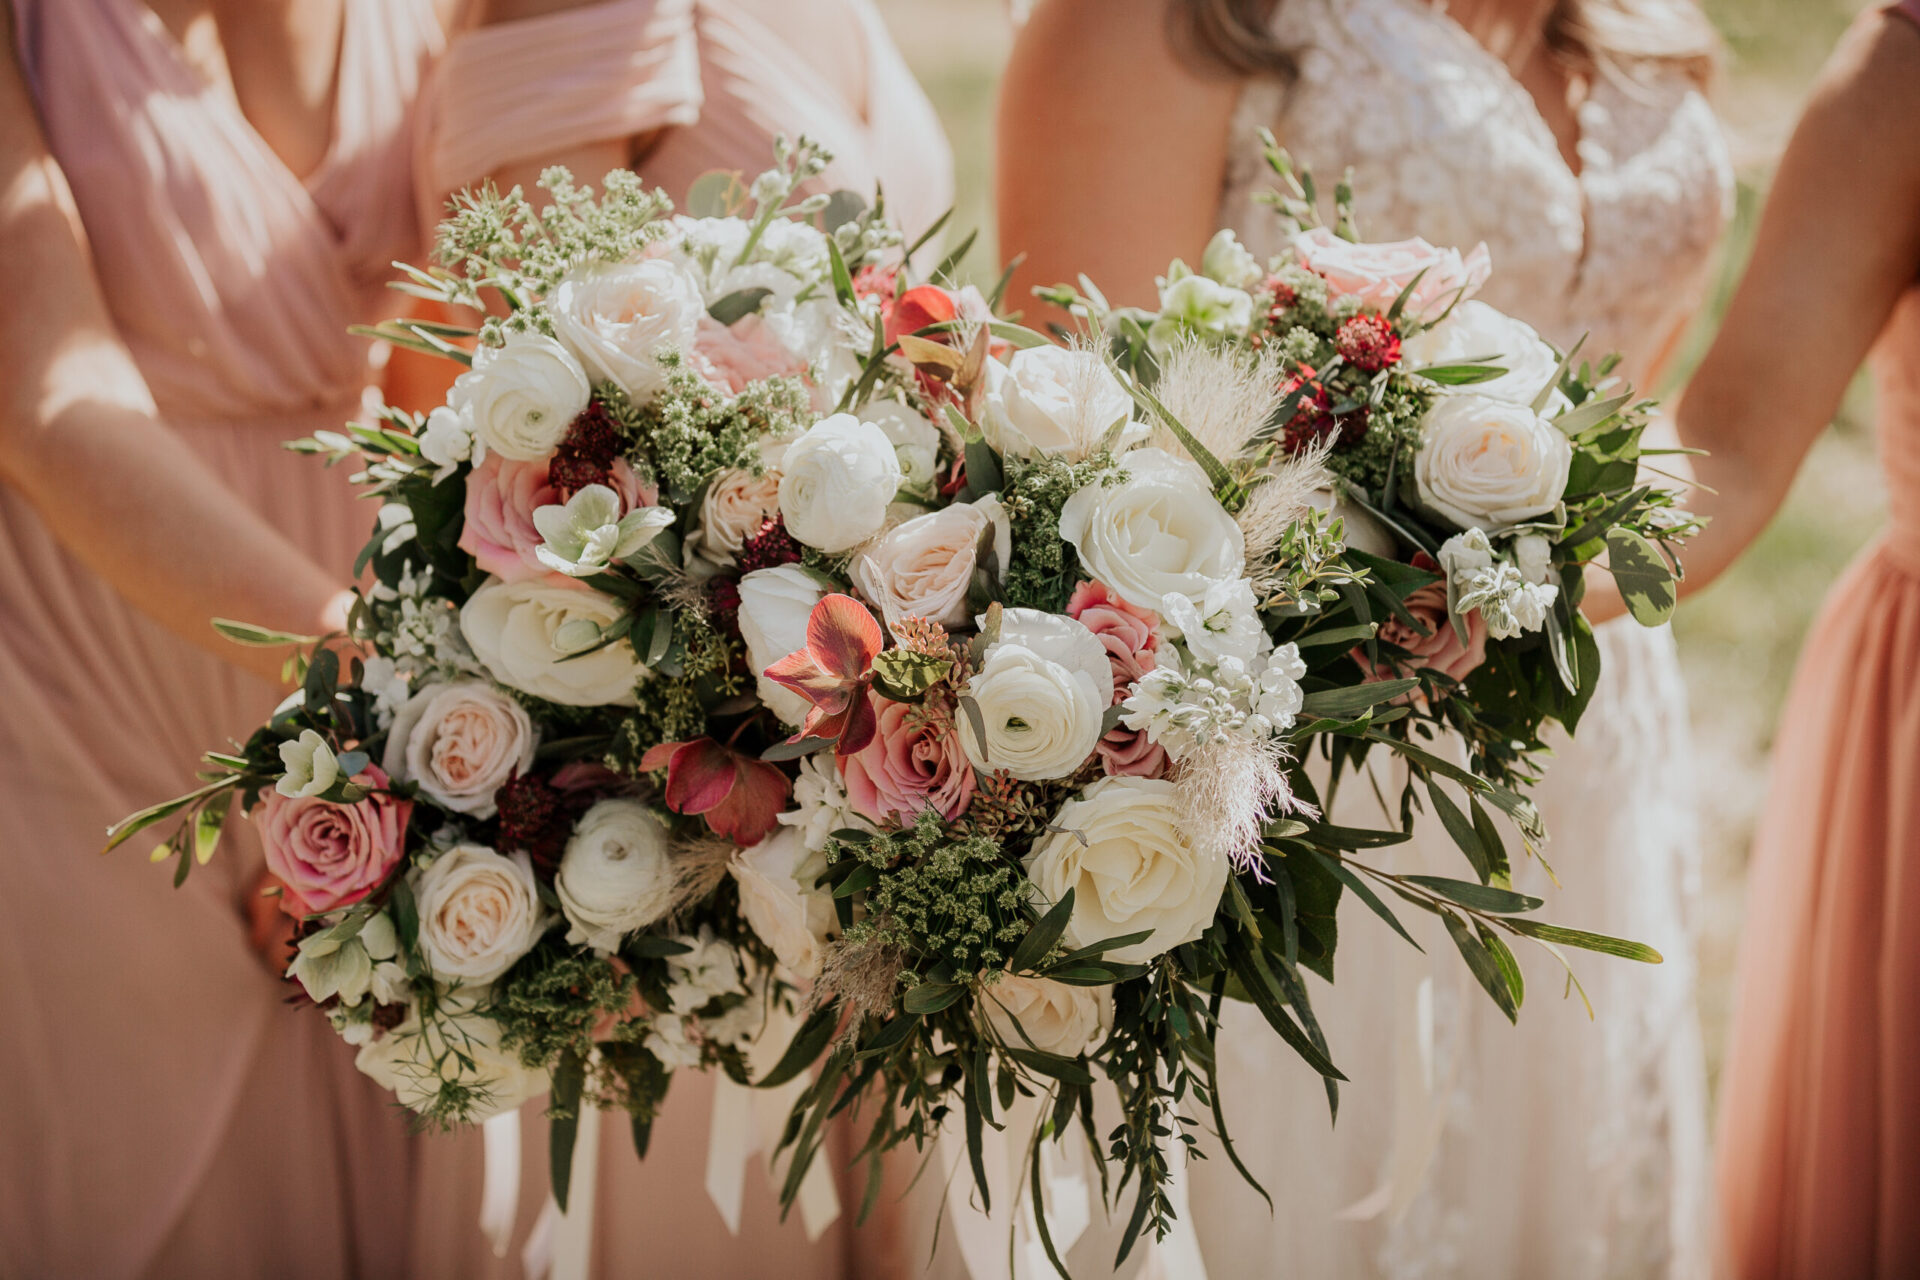 Zion Springs bridal bouquet pink and white flowers